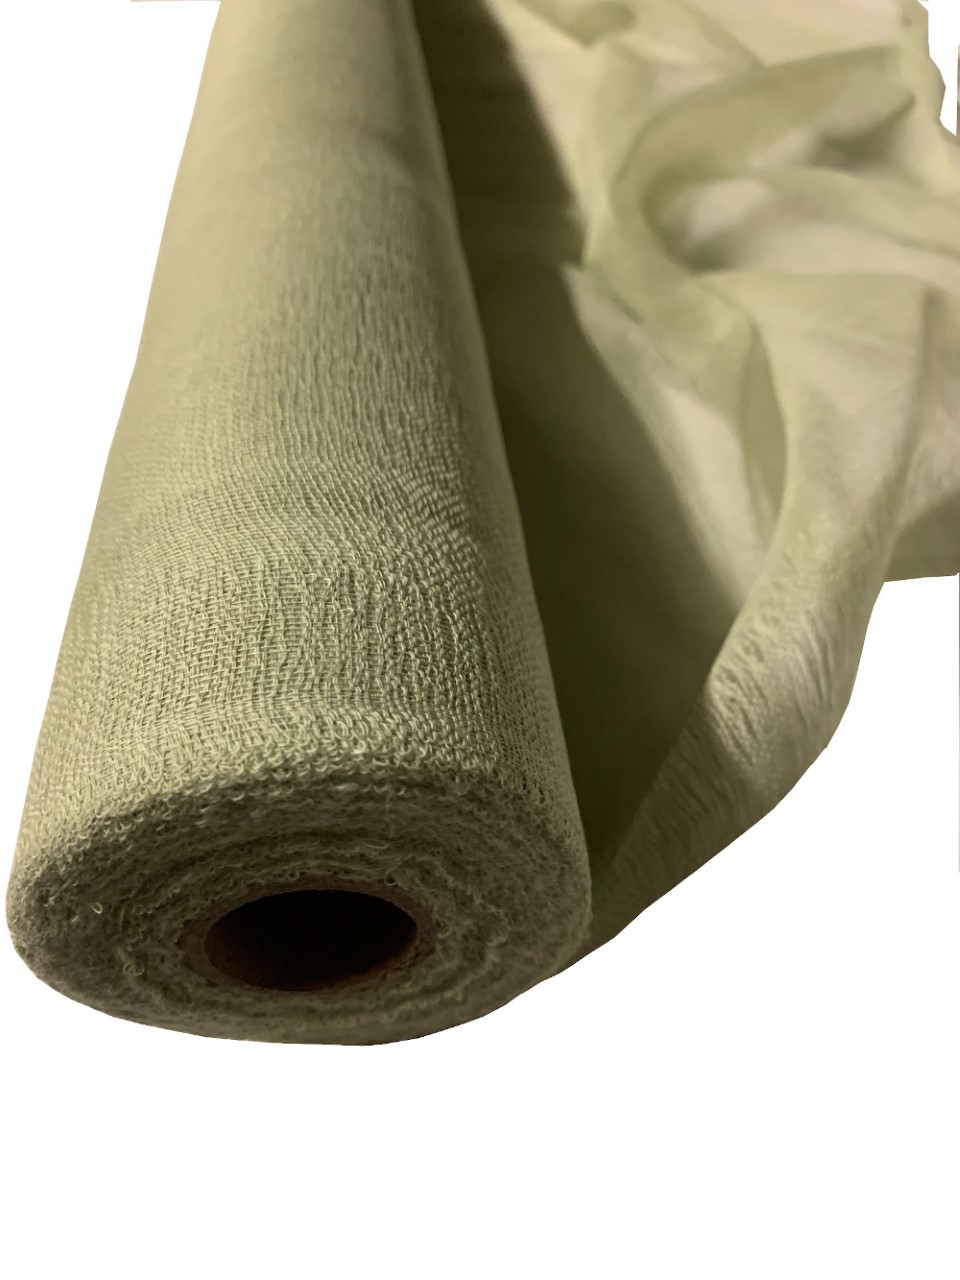 36" Sage Cheesecloth 100 Foot Roll - 100% Cotton